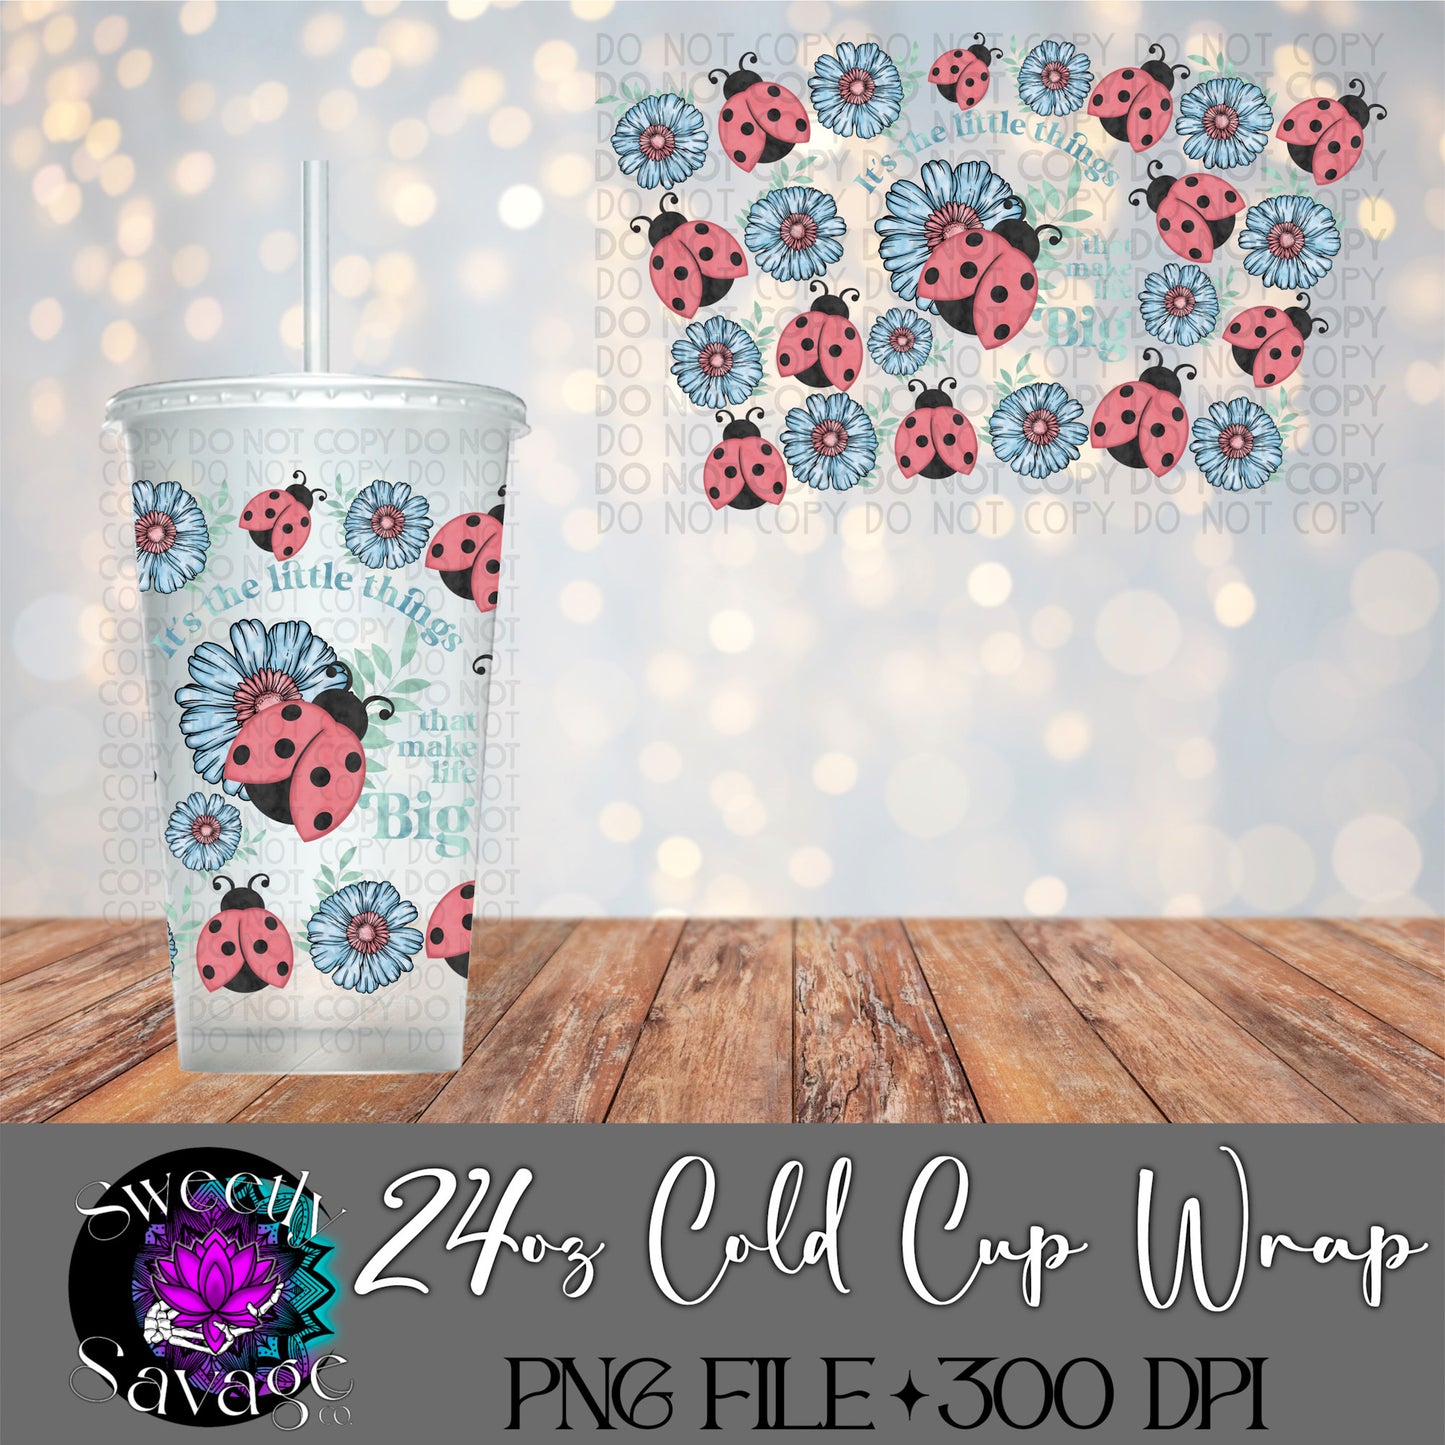 It’s the little things LadyBug 24oz Cold Cup wrap